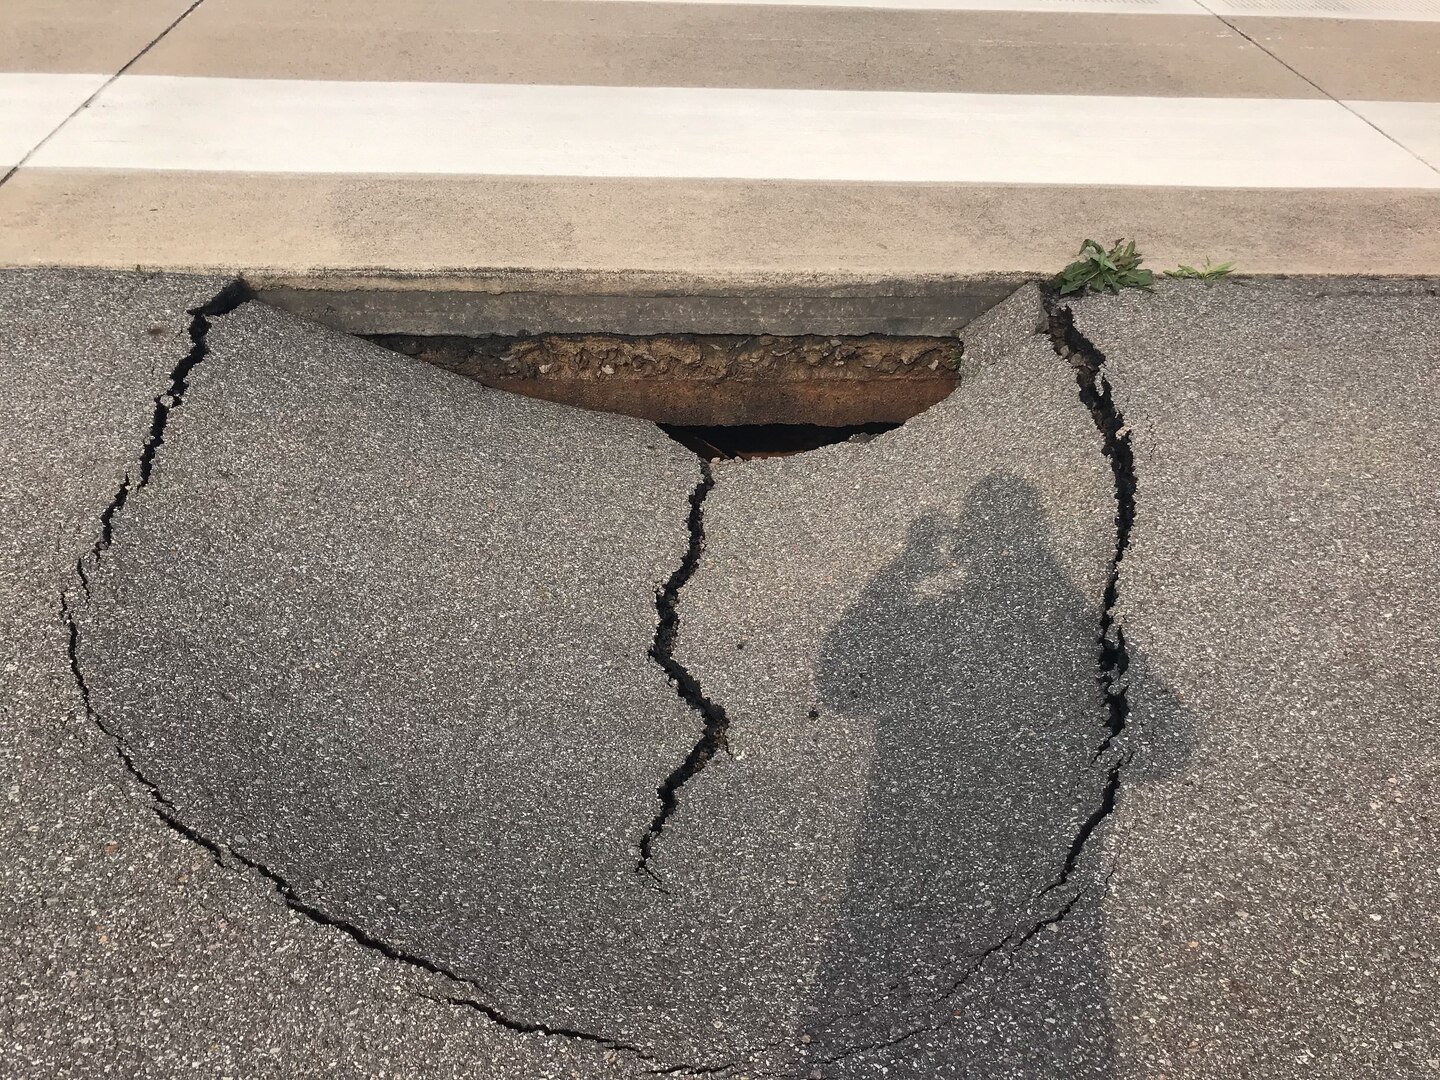 A 7 feet by 8 feet sinkhole was discovered on the runway at Kunsan Air Base, Republic of Korea, May 2, 2019. The 8th Civil Engineer Squadron and 8th Logistics Readiness Squadron made the flight line operational again just 24 hours after it was shut down to repair a sinkhole. (Courtesy photo)